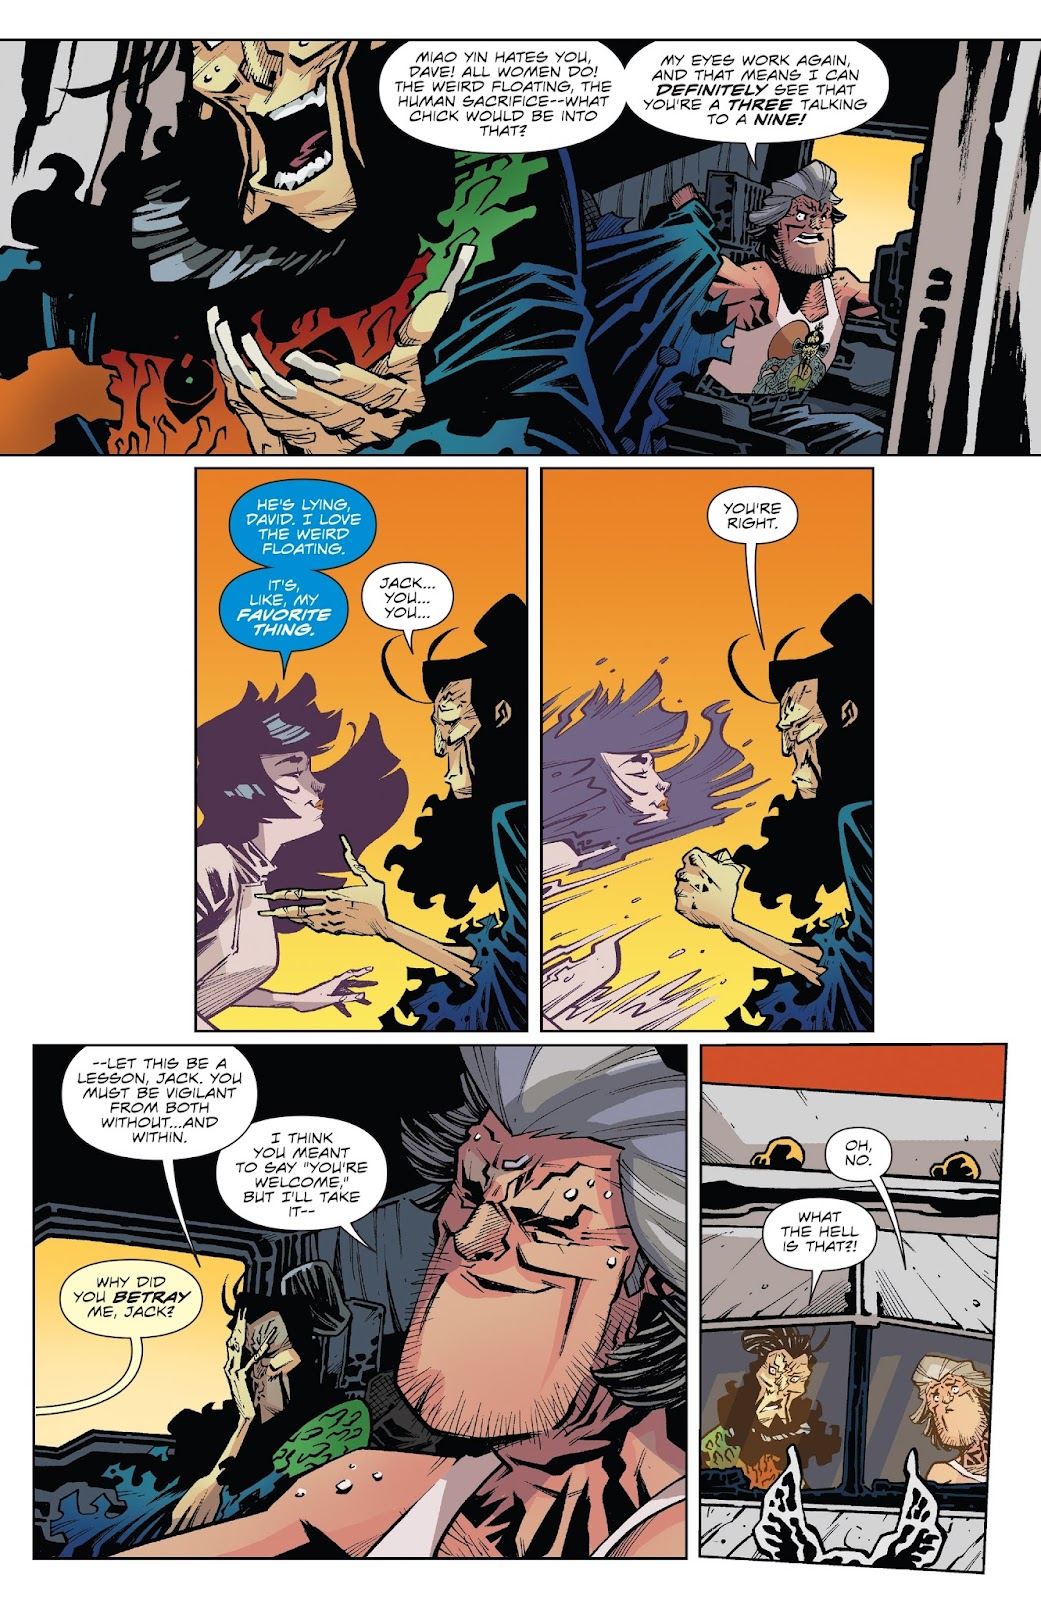 Big Trouble in Little China: Old Man Jack issue 3 - Page 5